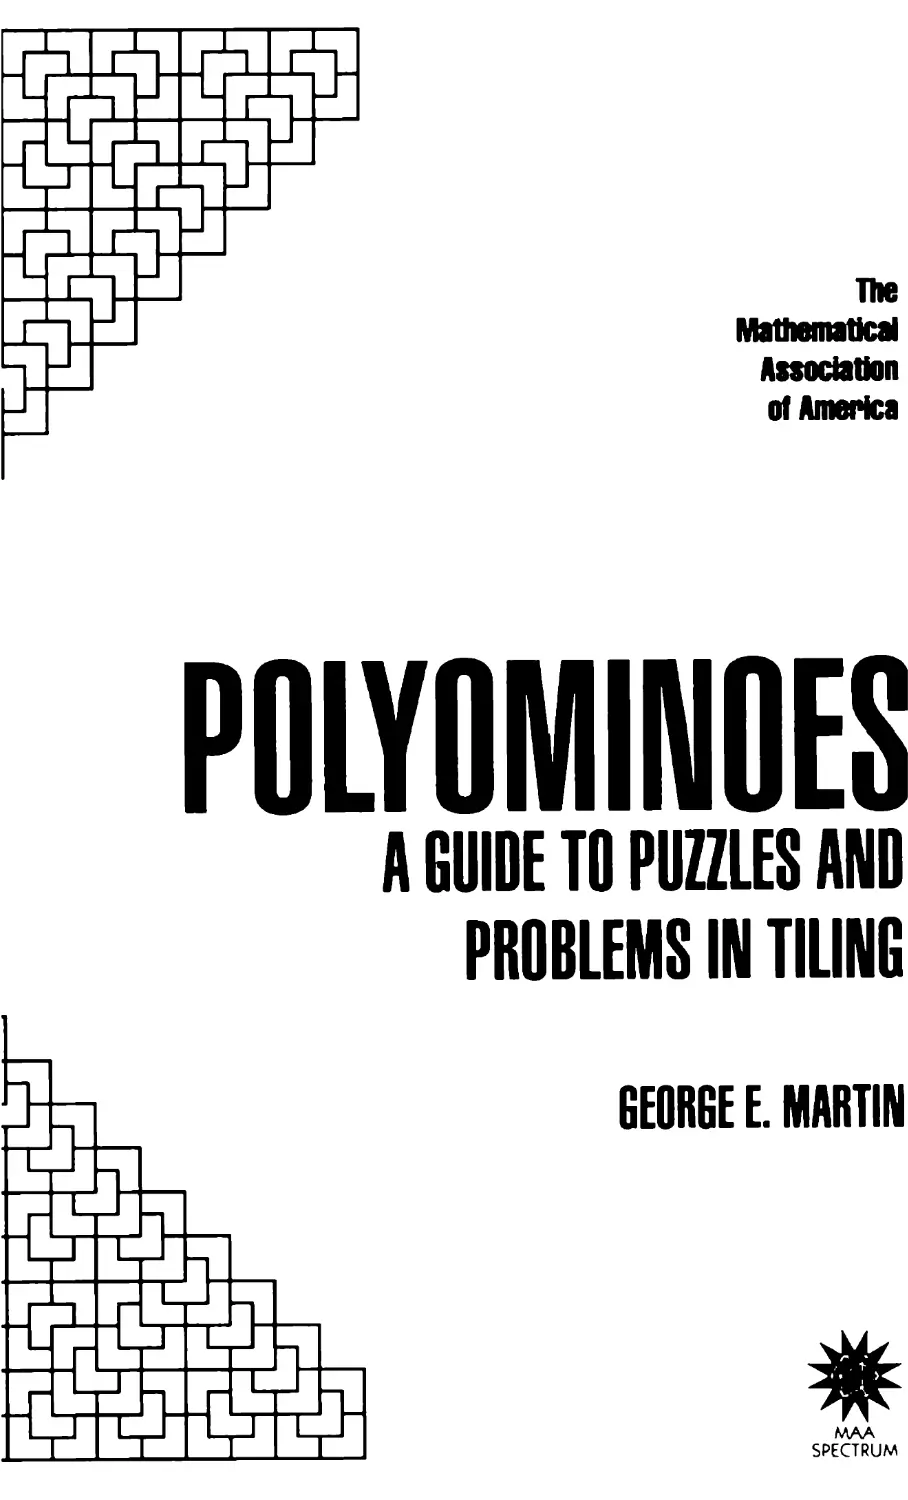 Polyominoes: A Guide to puzzles and problems in tiling